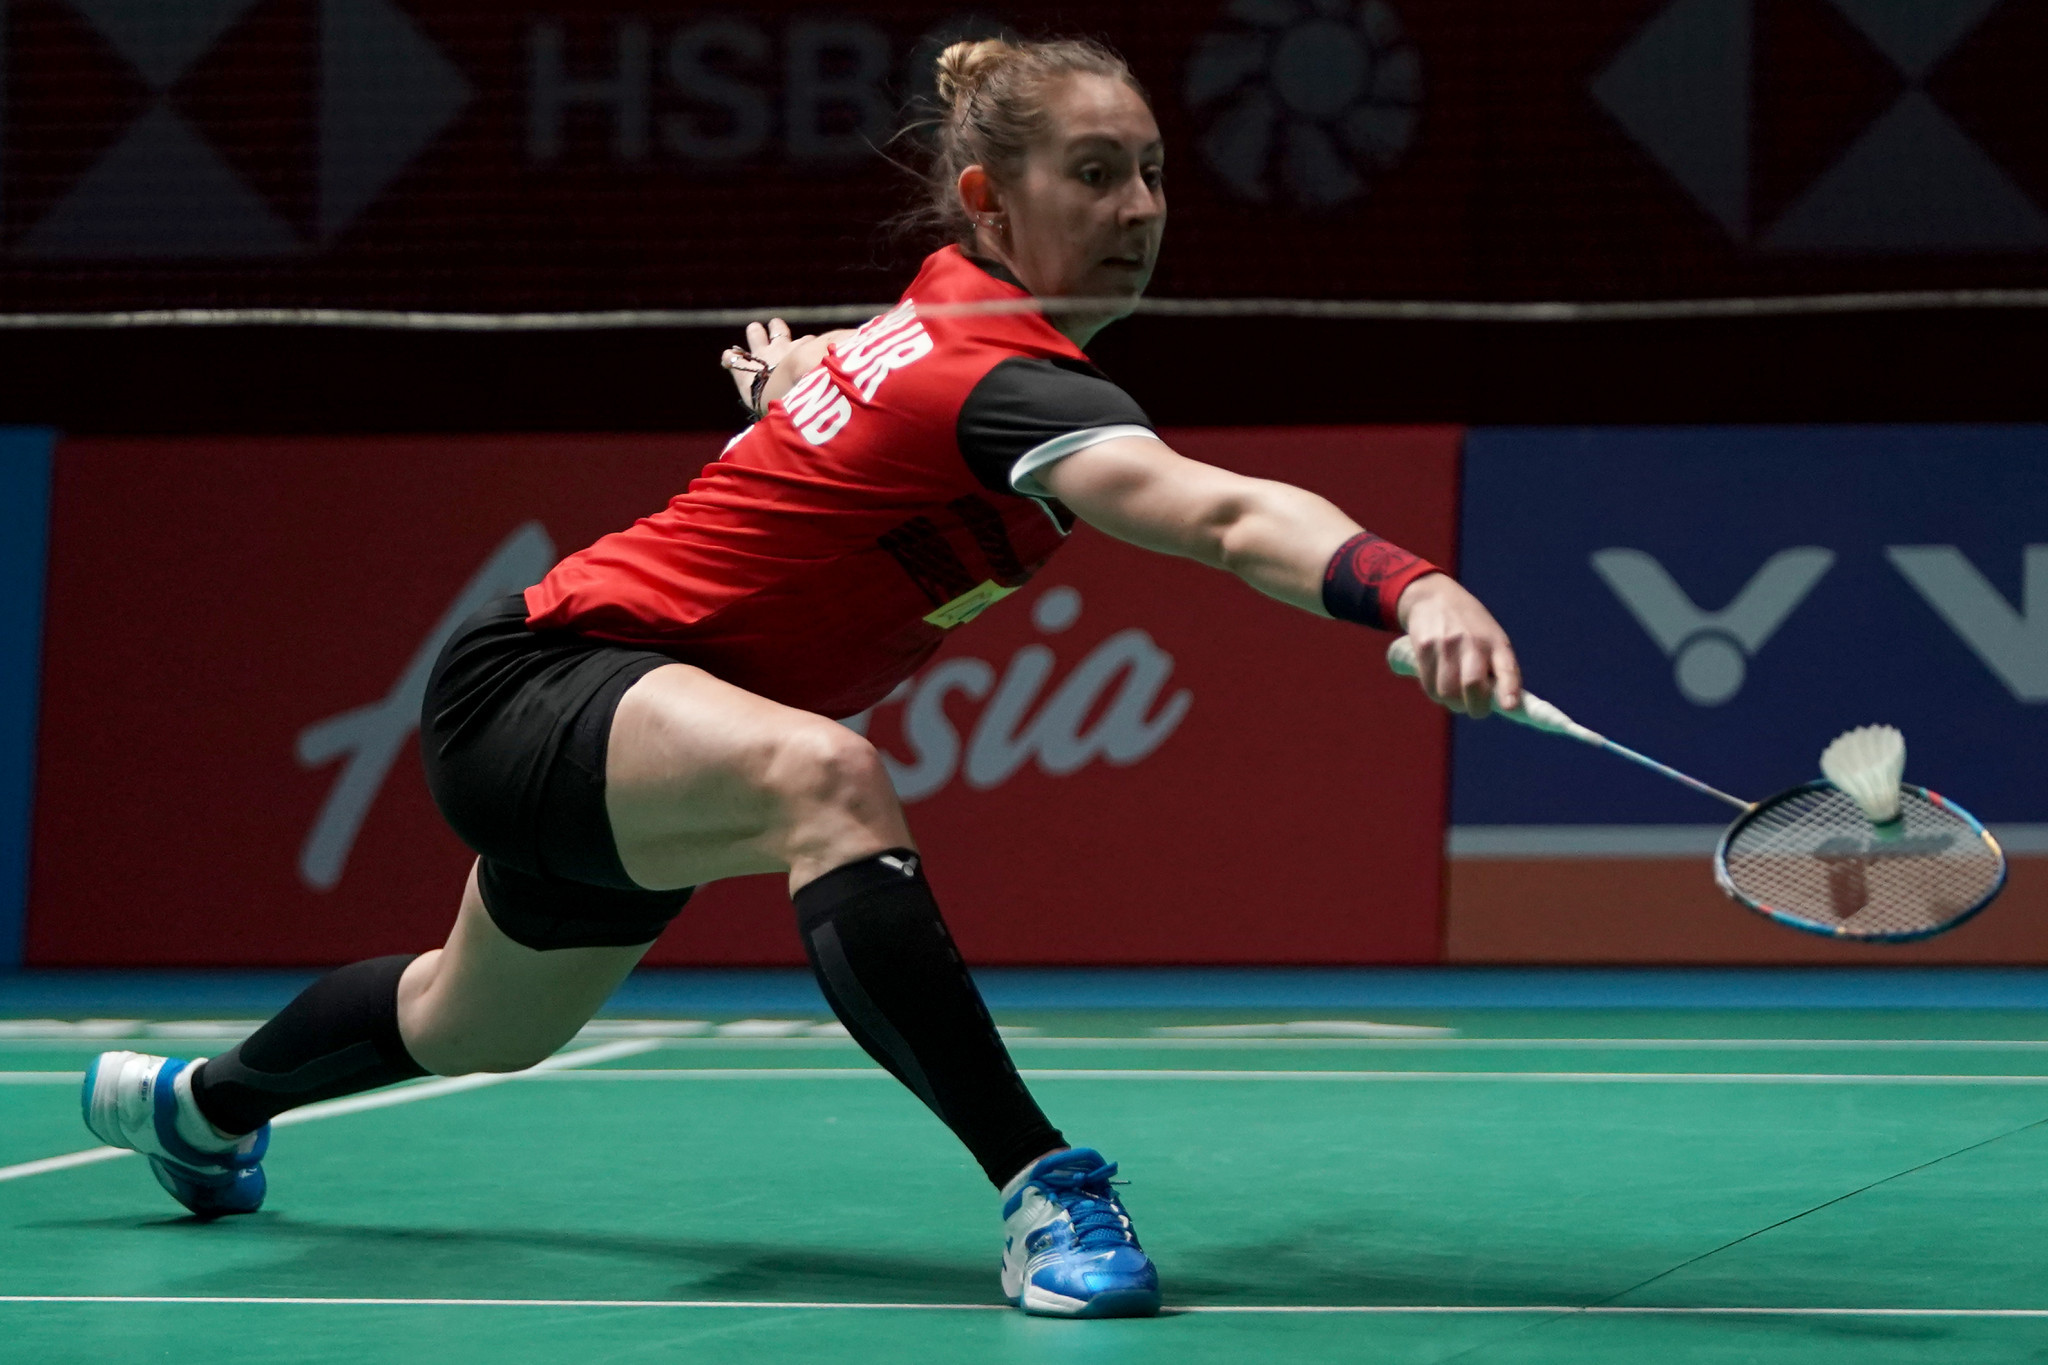 Scotland's Kirsty Giilmour was narrowly beaten in the women's singles final at the BWF Russian Open today ©Getty Images